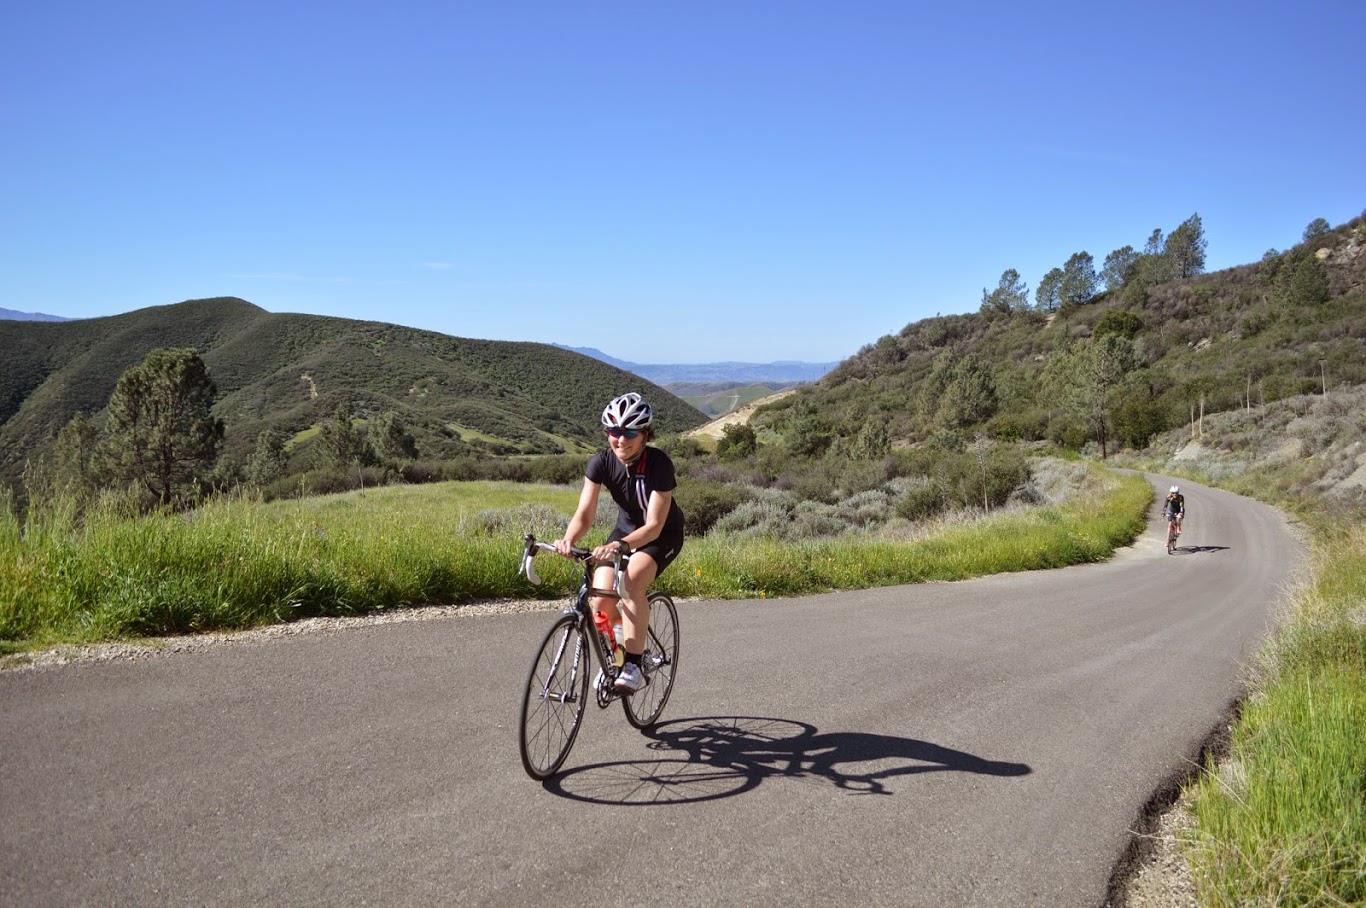 California cycling camp, road cycling at it's best.